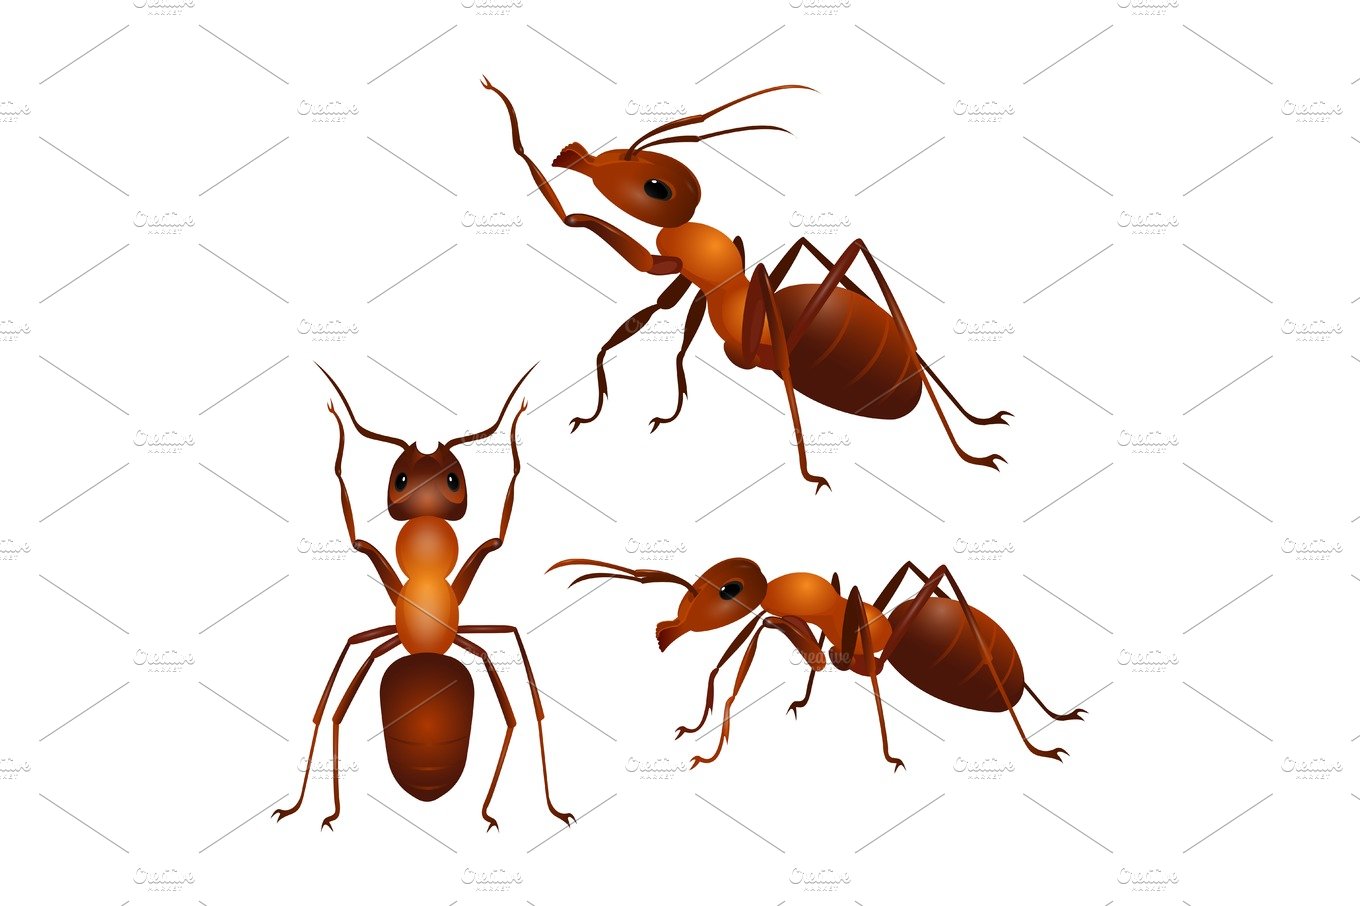 Set of ants with two antennas and six legs in different poses. Vector cover image.